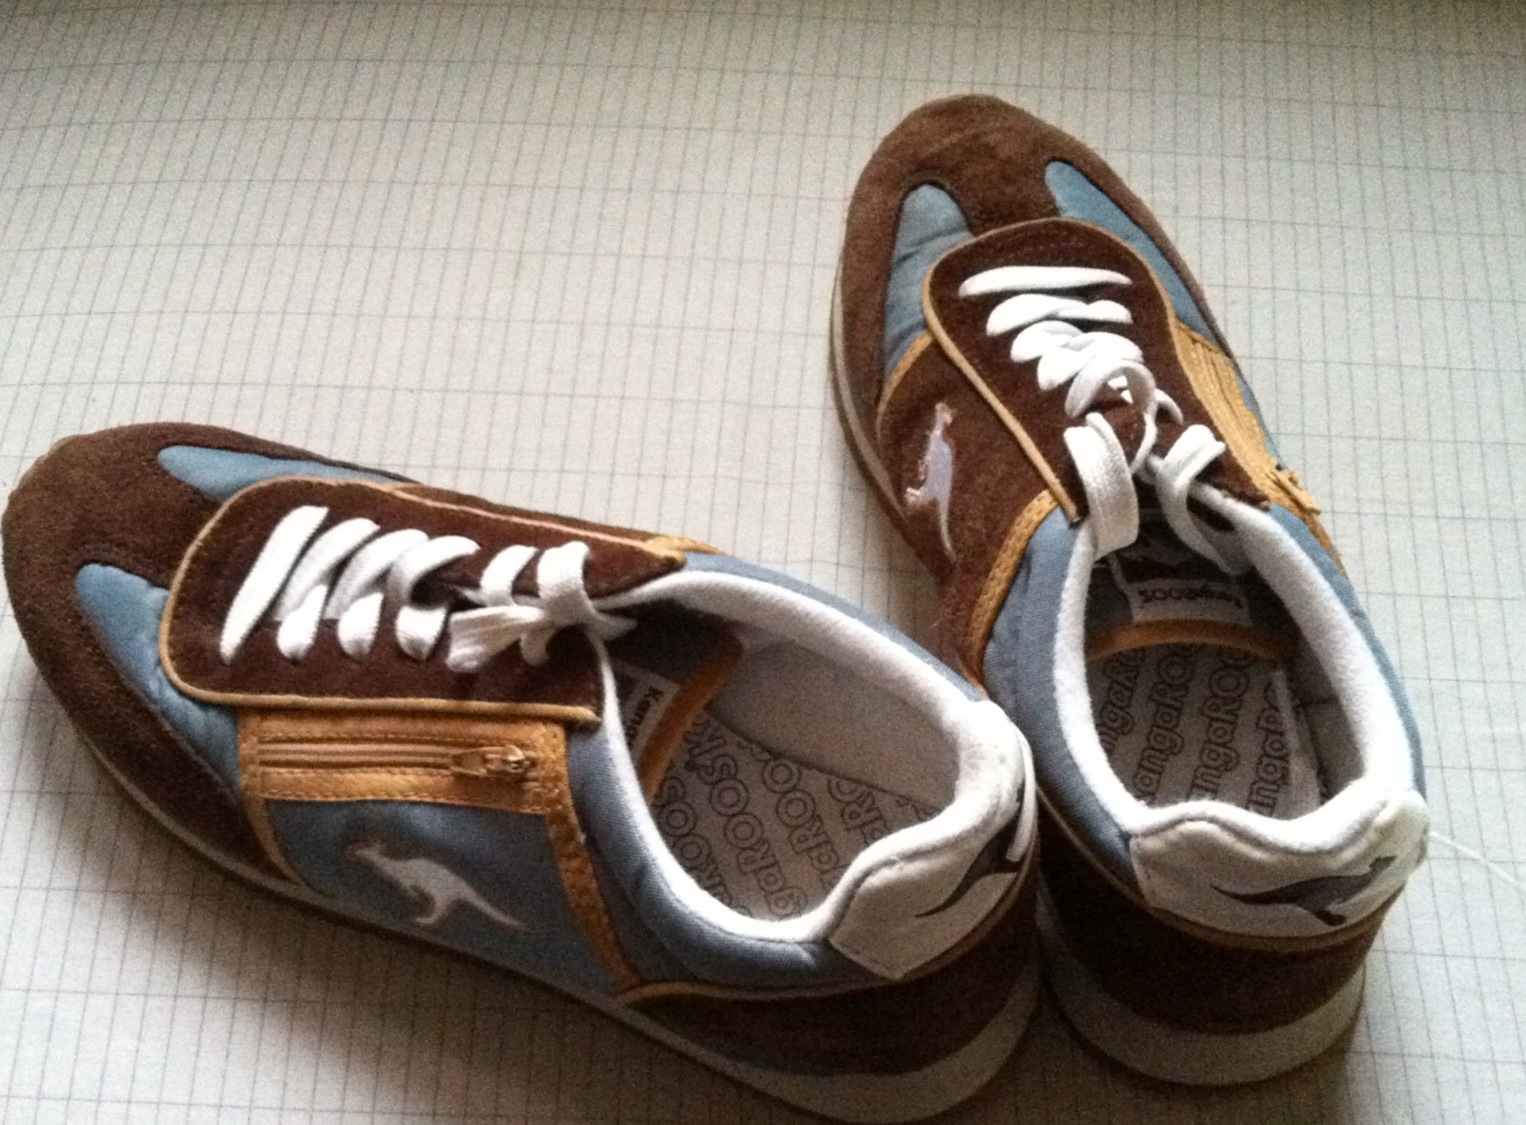 I am also currently and synchronistically selling my kangaROO sneakers via ebay.